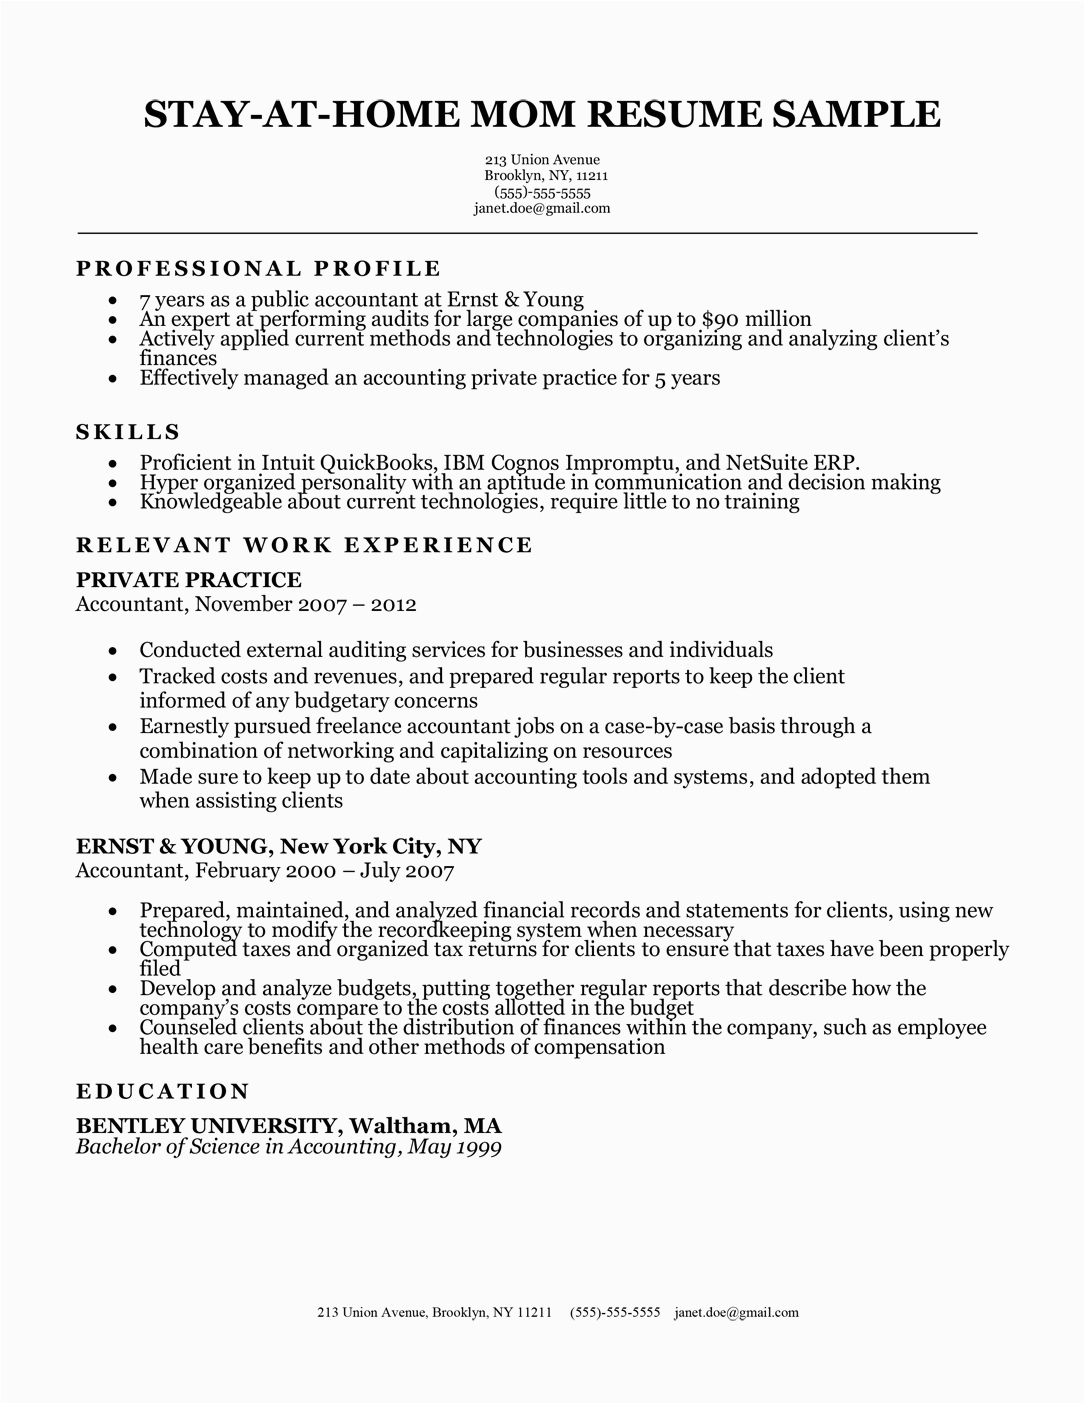 Resume Profile Samples for Stay at Home Moms Stay at Home Mom Resume Sample & Writing Tips